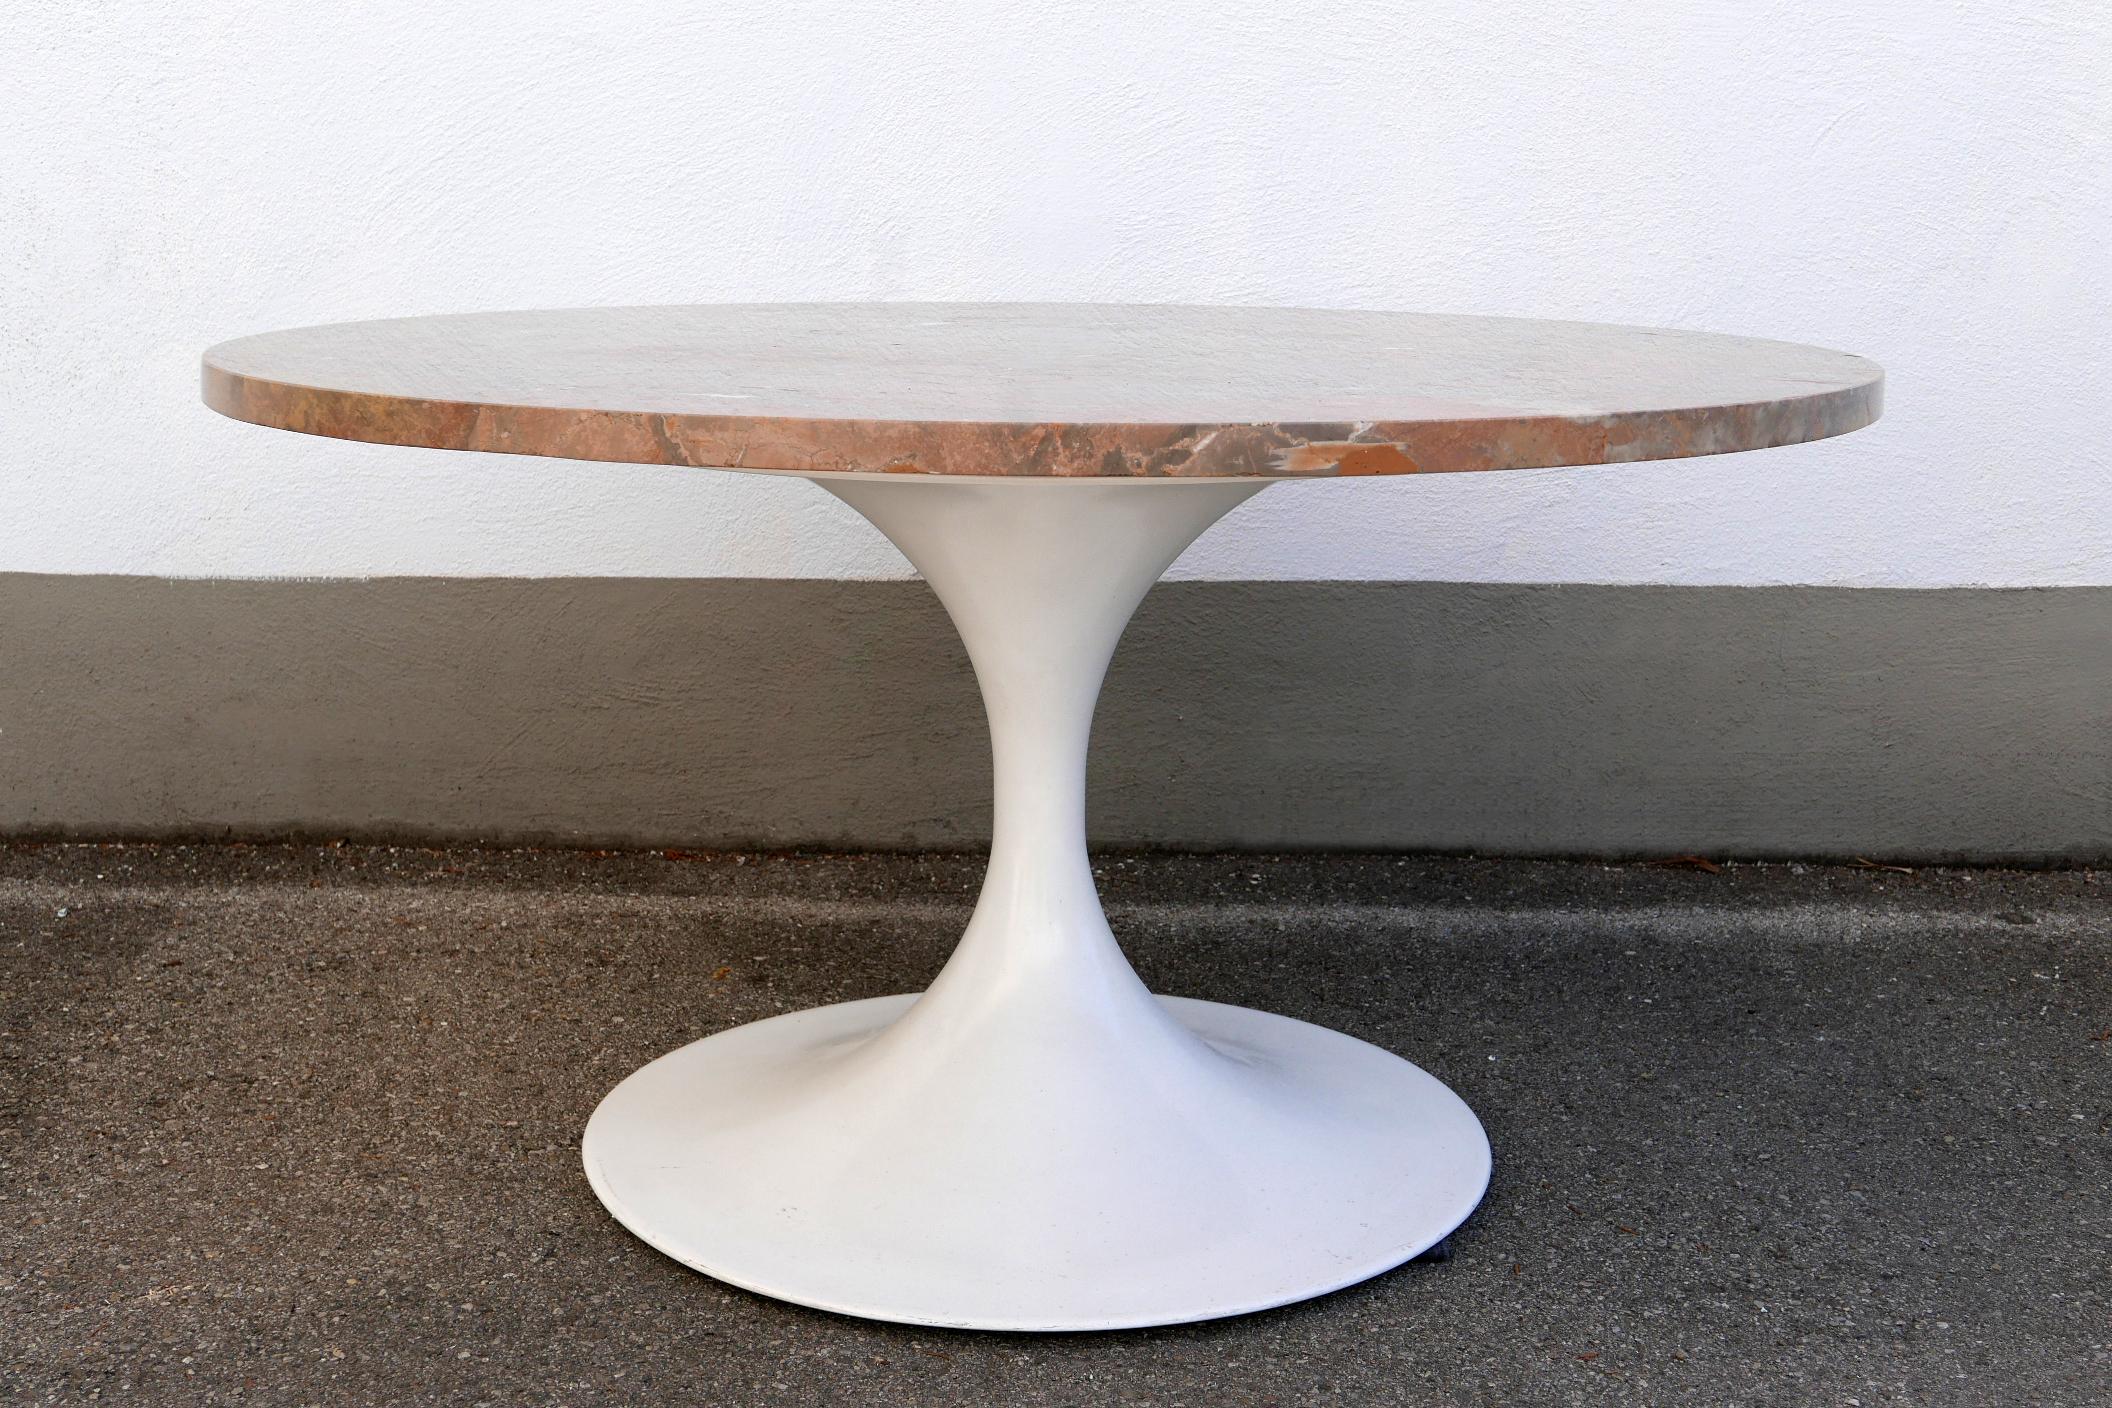 Aluminum Rare Mid-Century Modern Tulip Base Marble Coffee Table by Honsel, Germany, 1960s For Sale